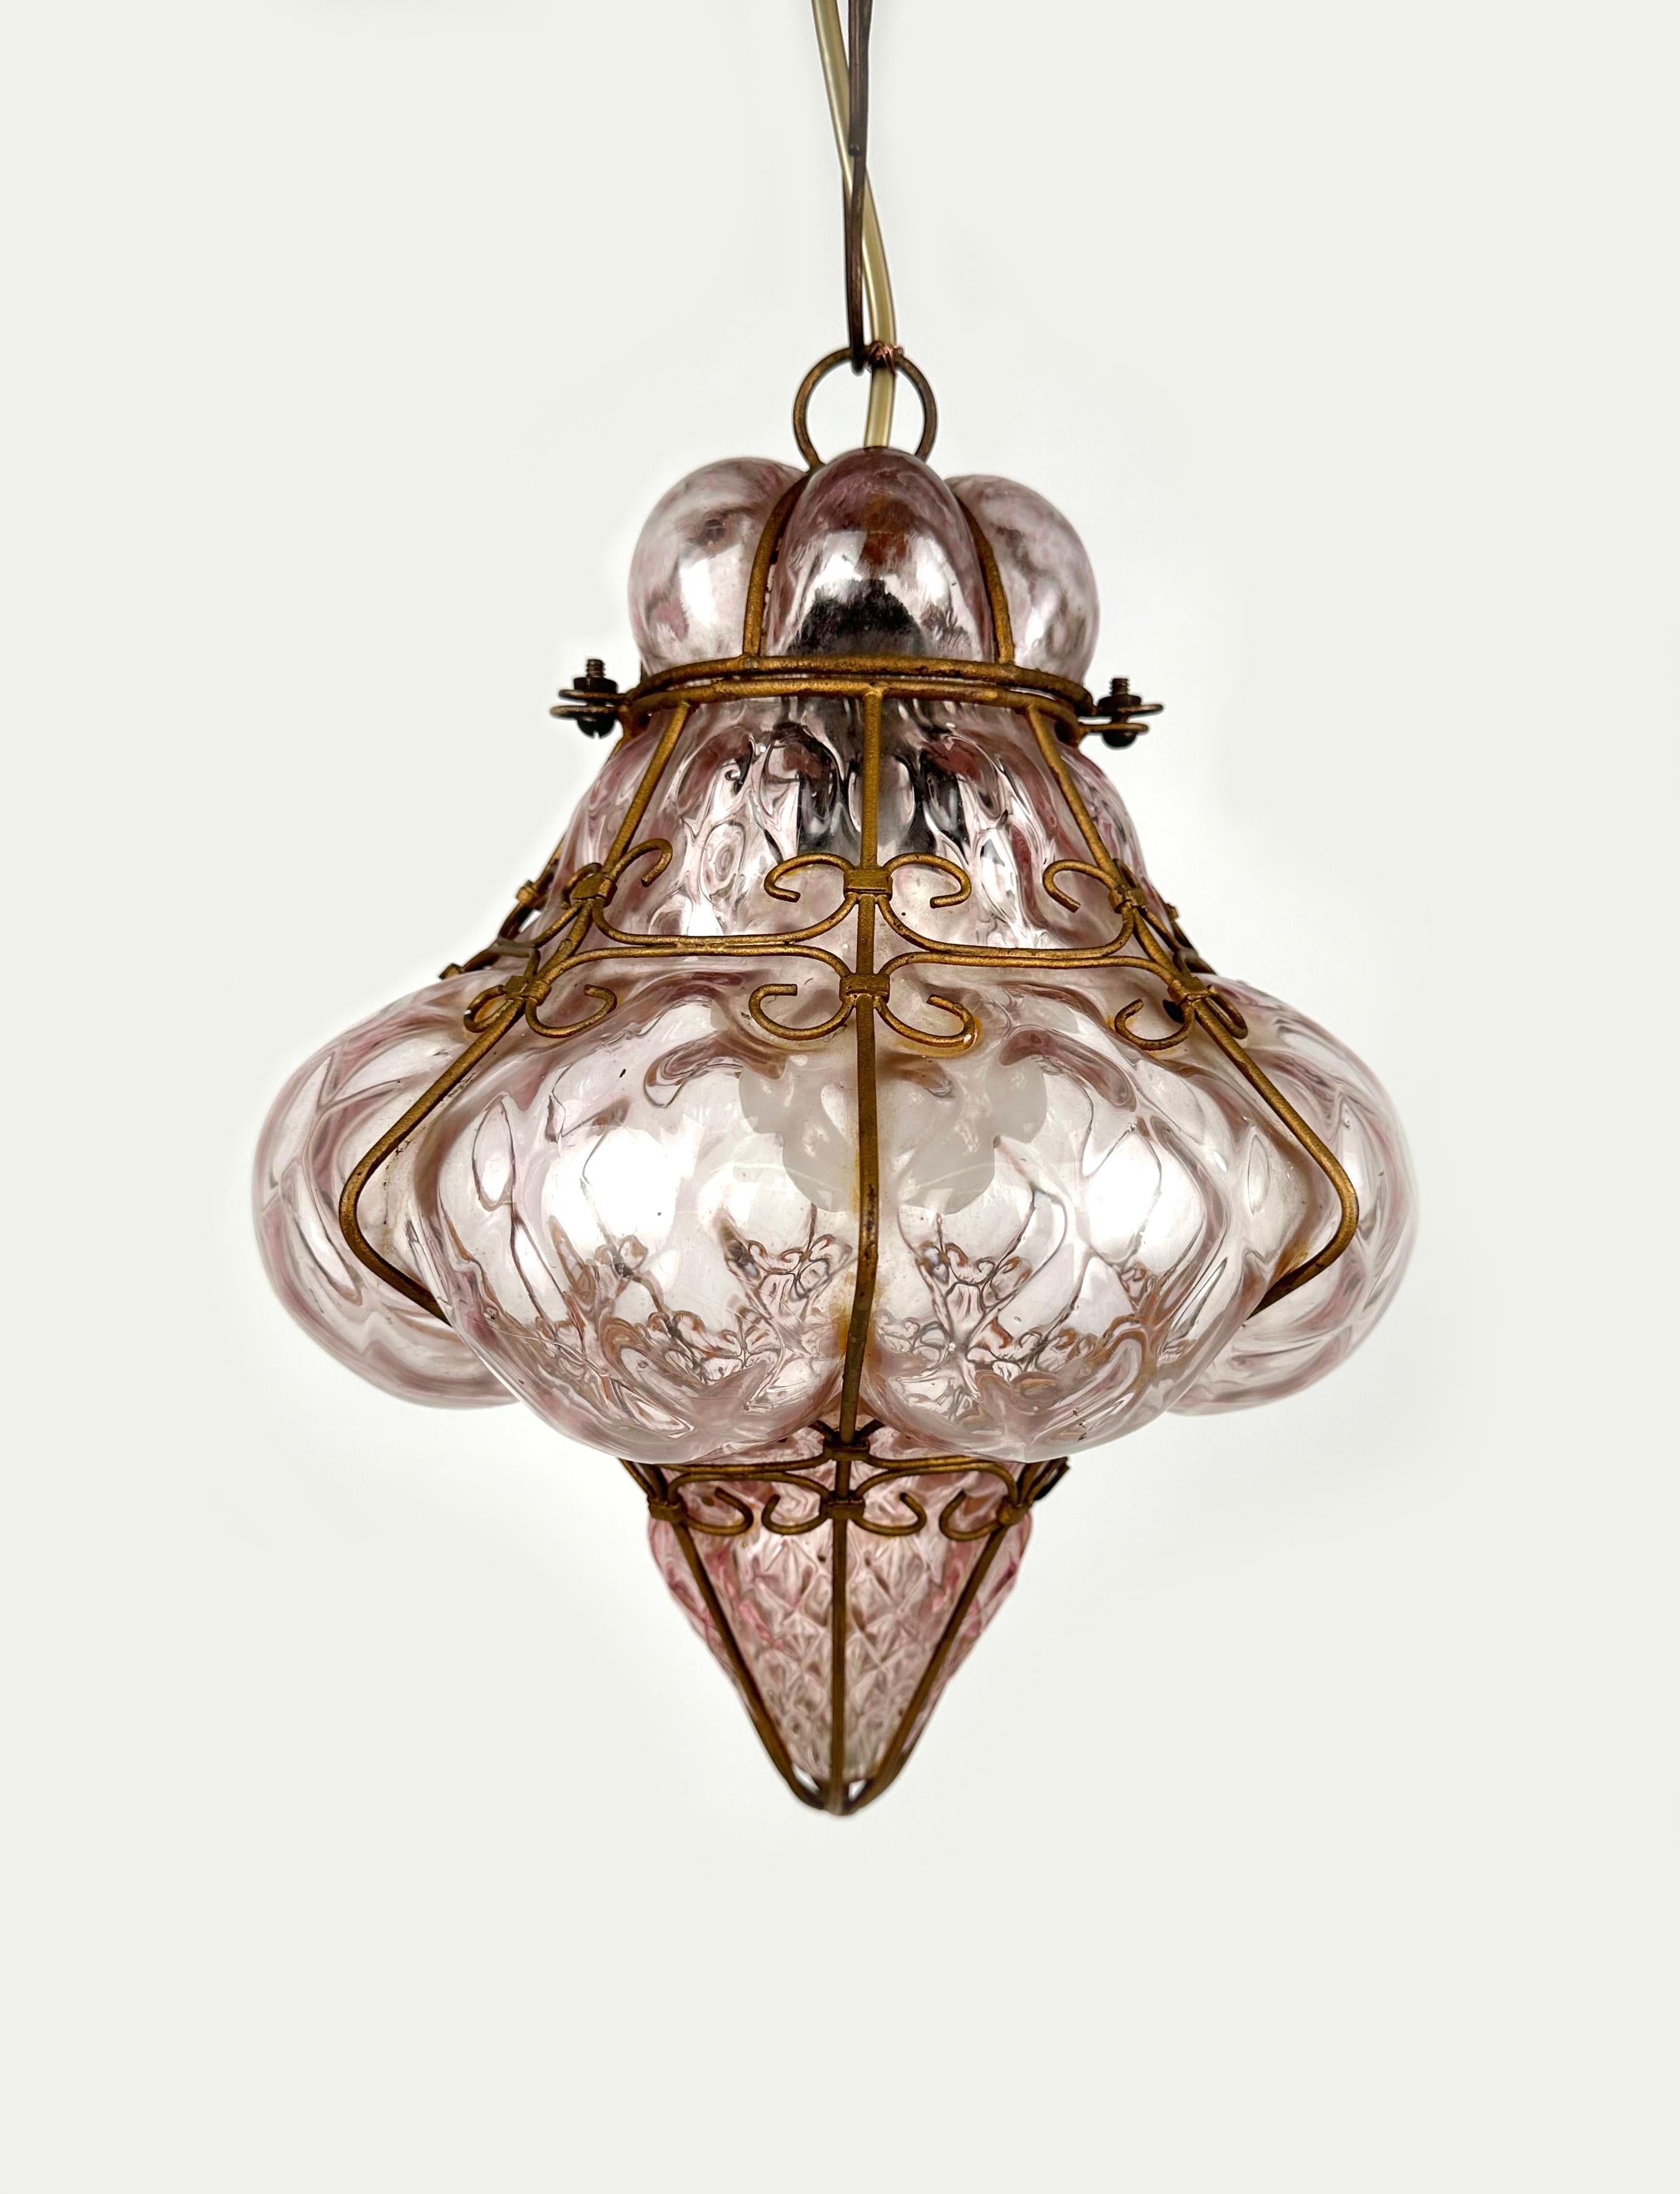 Mid-20th Century Midcentury Handblown Murano Pink Glass Pendant Light by Seguso, Italy, 1940s For Sale